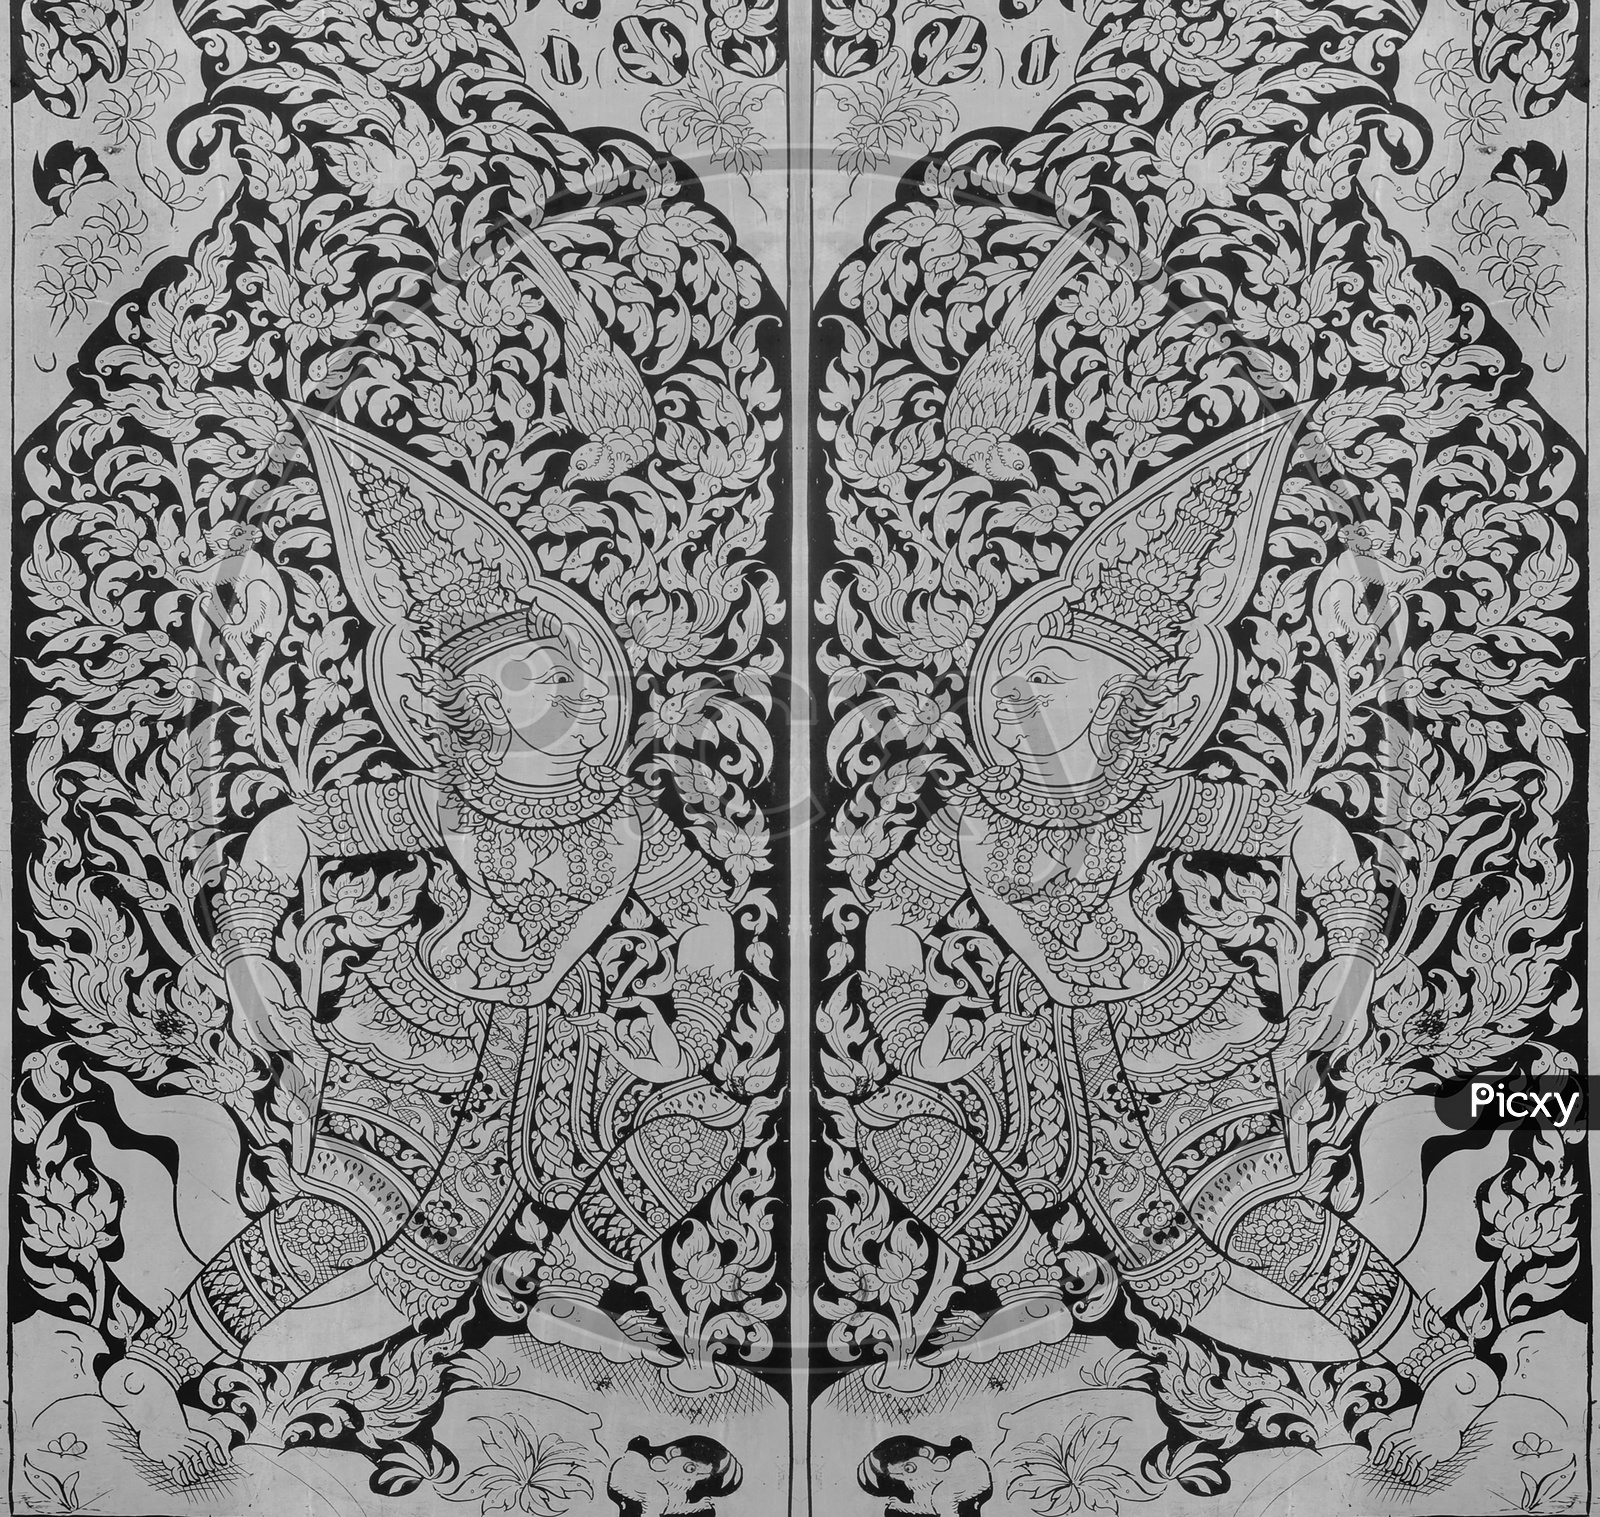 Thai painting on wood, black and white